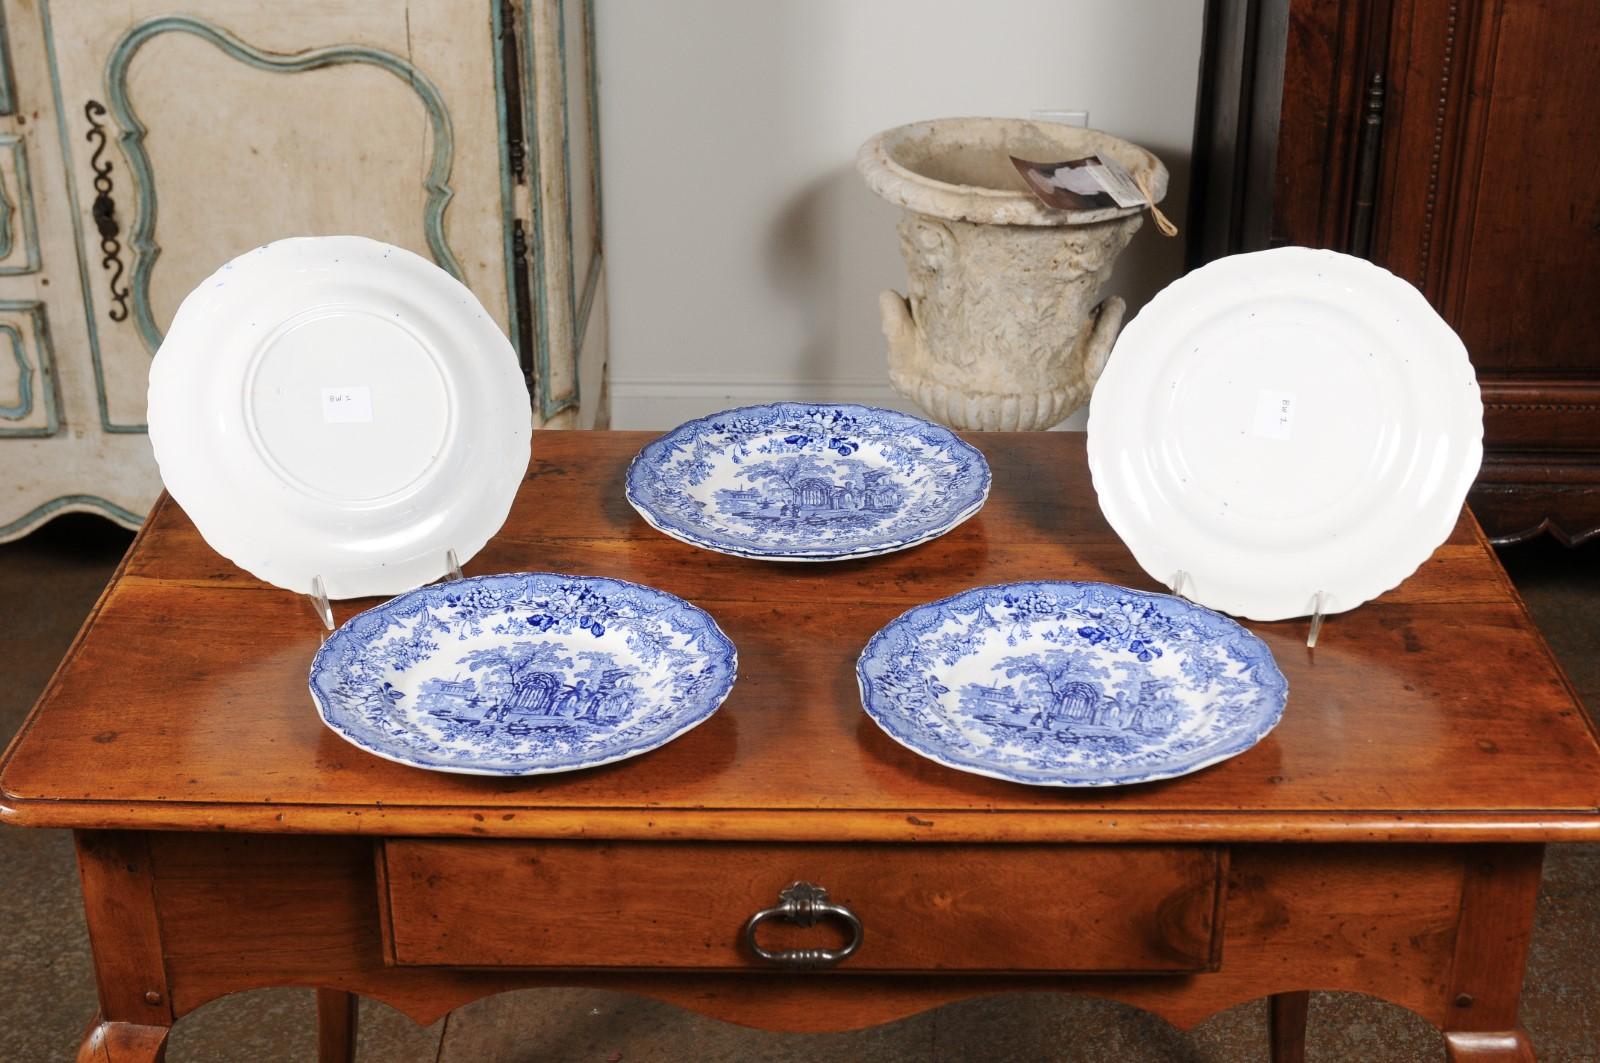 Ceramic English Blue and White Transfer Plates with Gothic Ruins Motifs, 19th Century For Sale